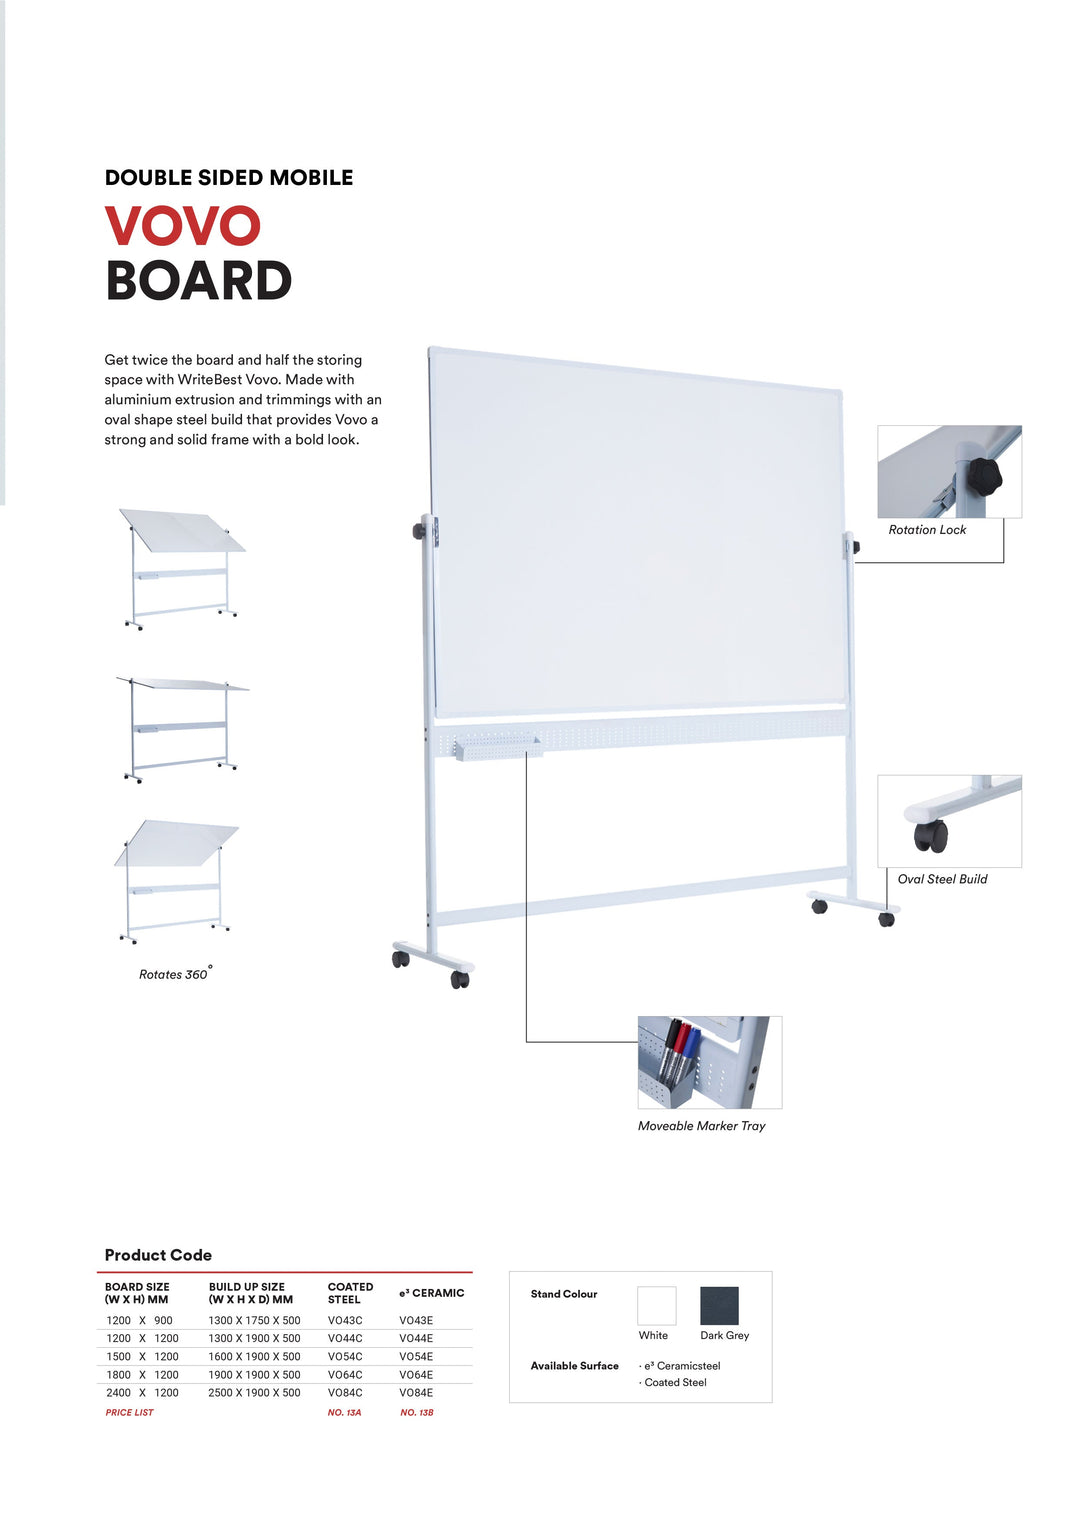 VOVO Double Sided Mobile Board